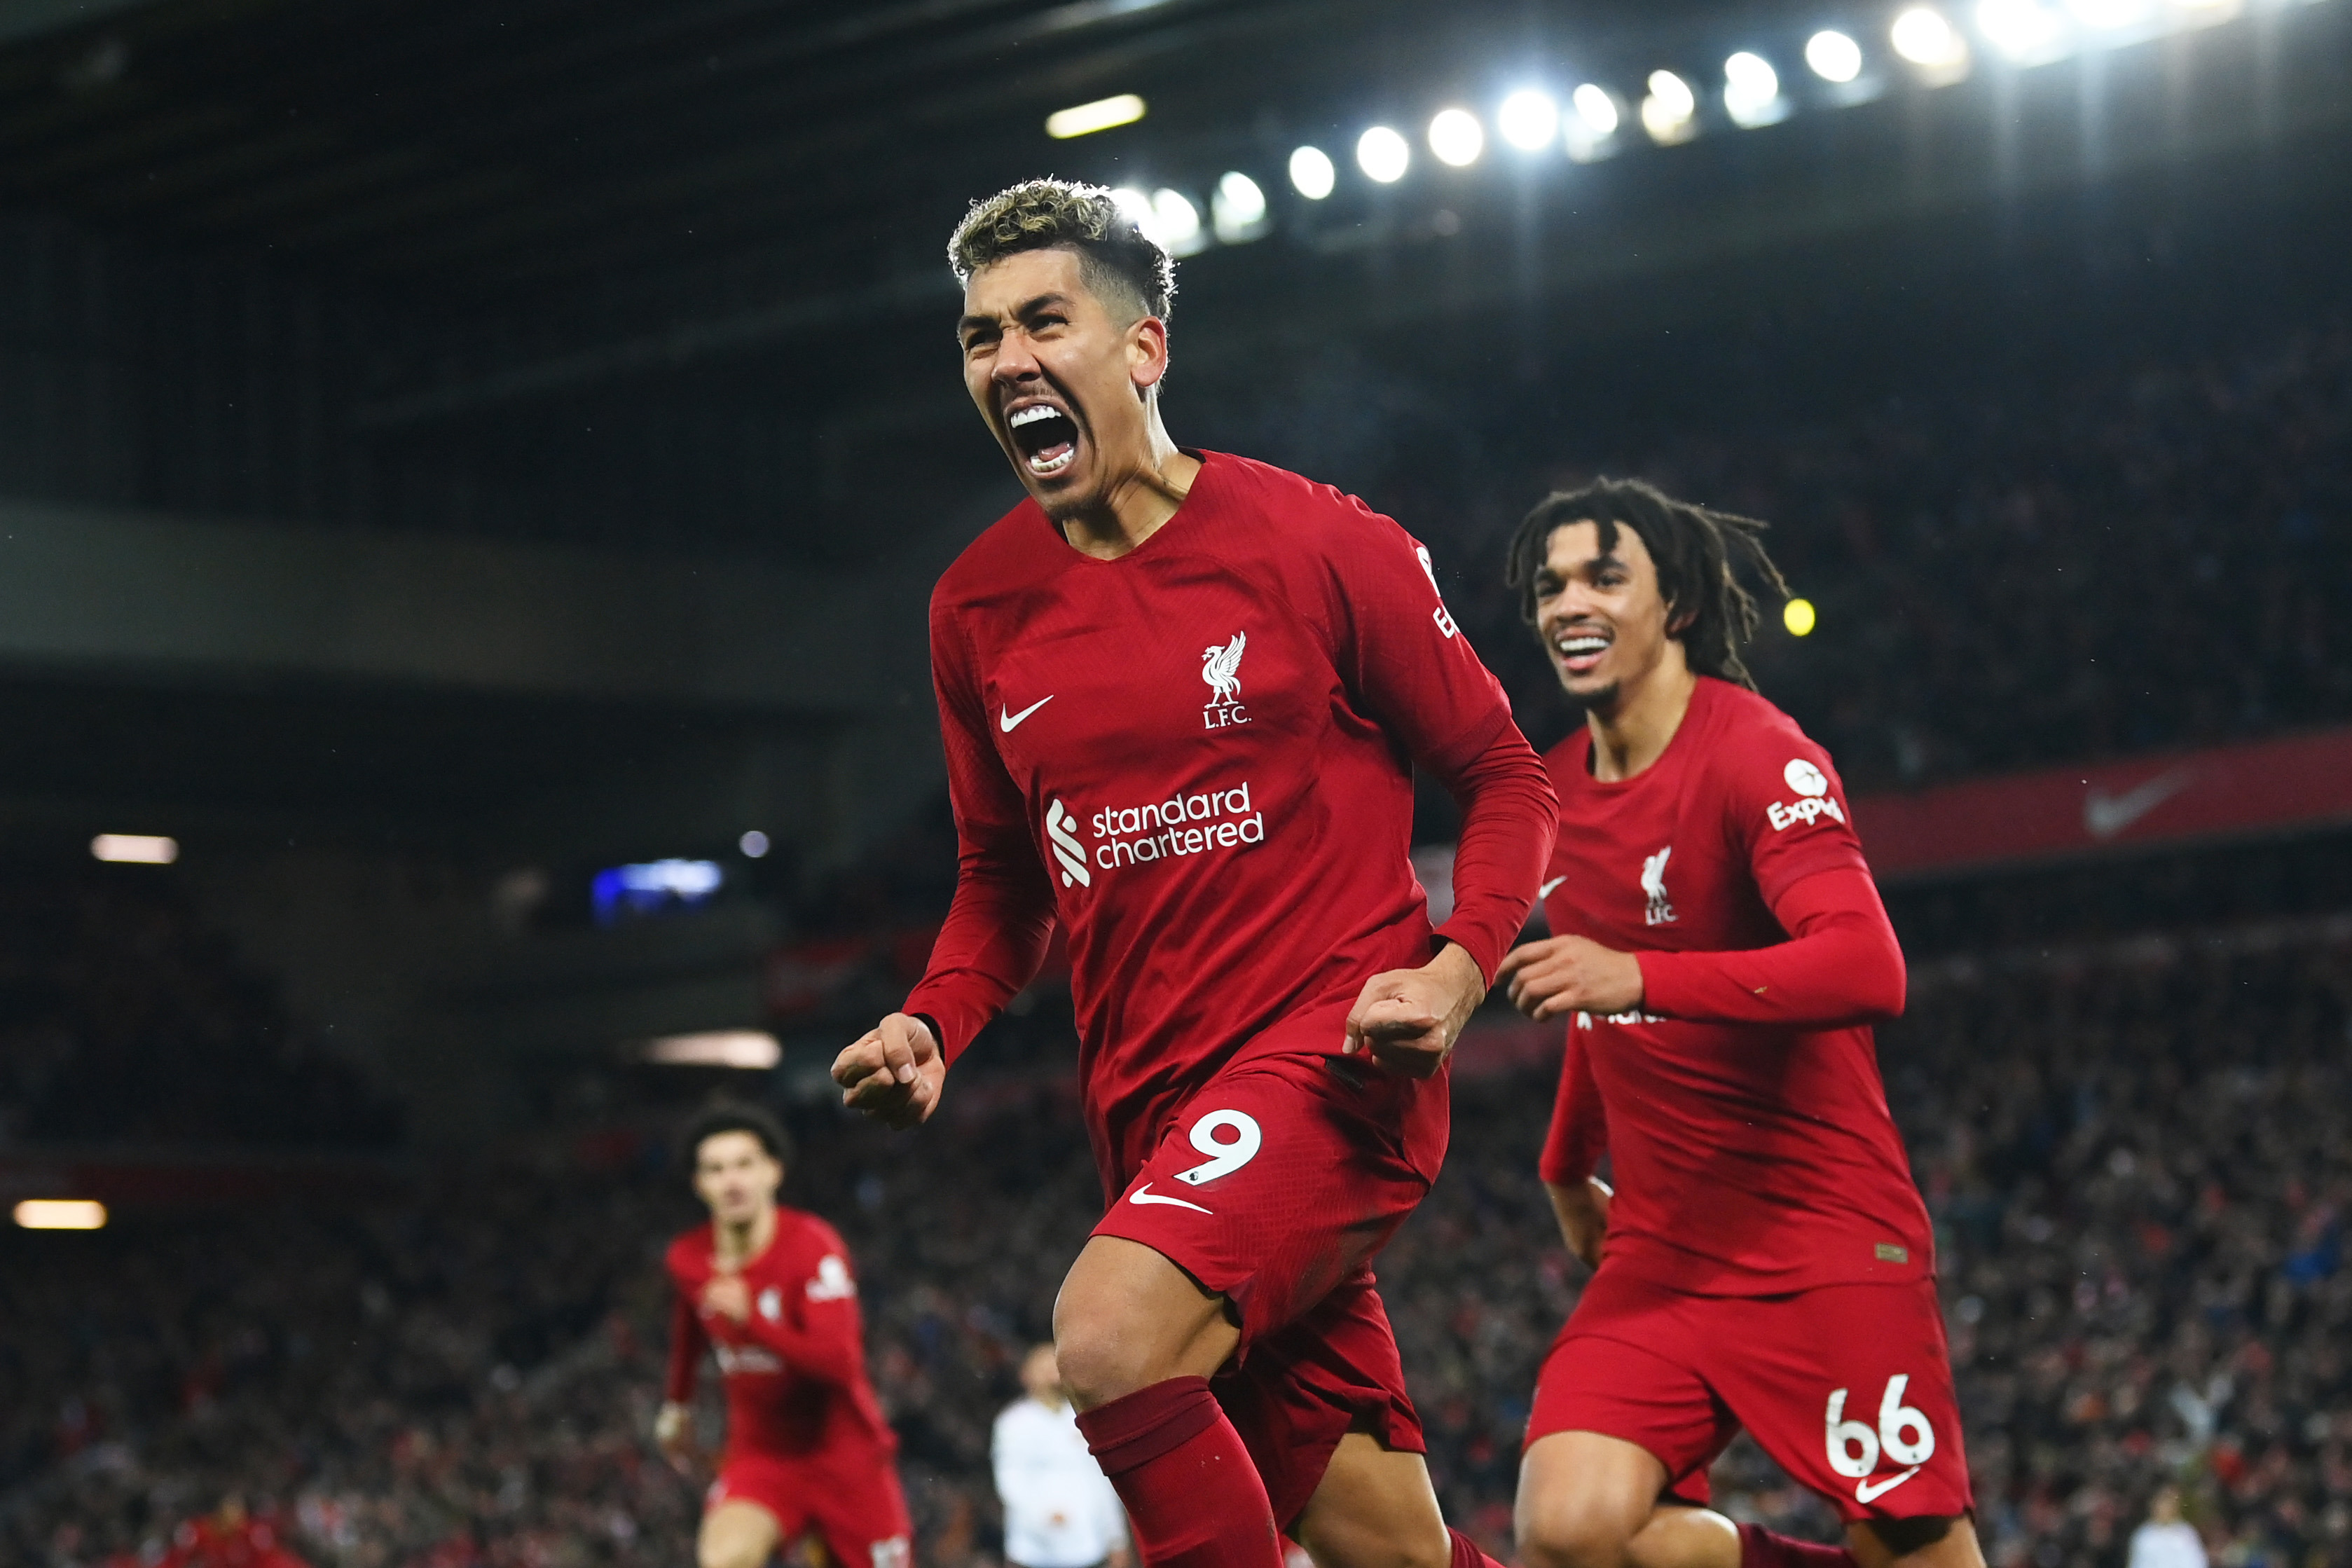 Football news 2023 EPL, Liverpool humiliates Manchester United, 7-0 score breaks records